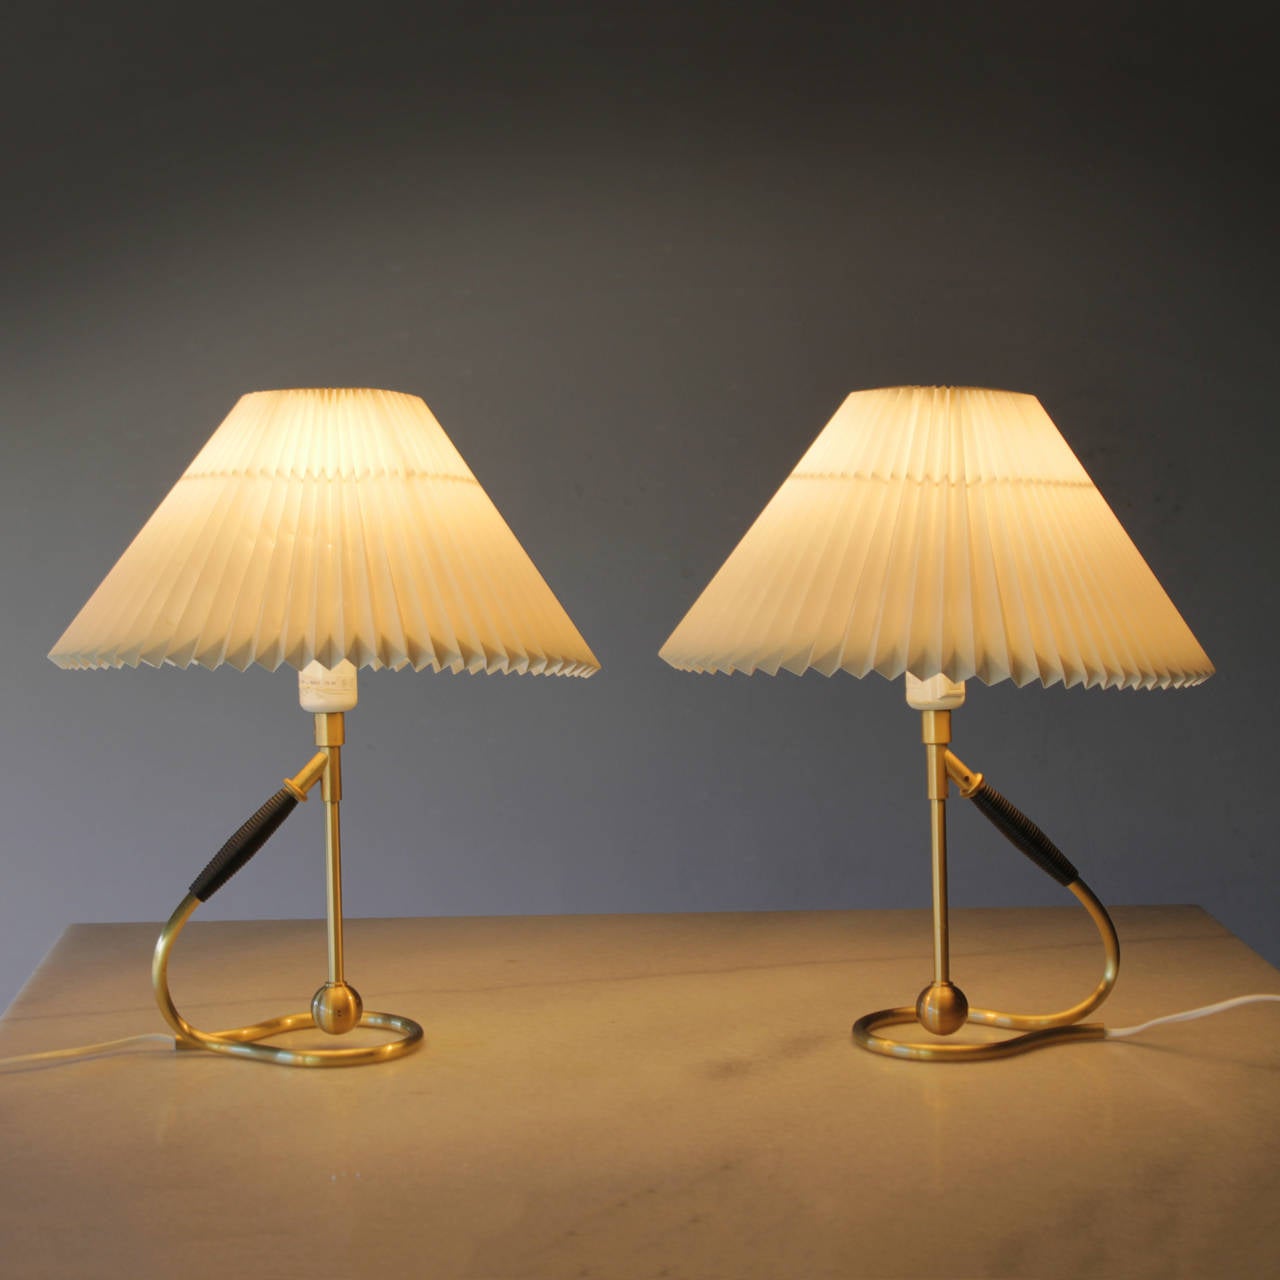 Pair of Lamps by Kaare Klint for Le Klint 1